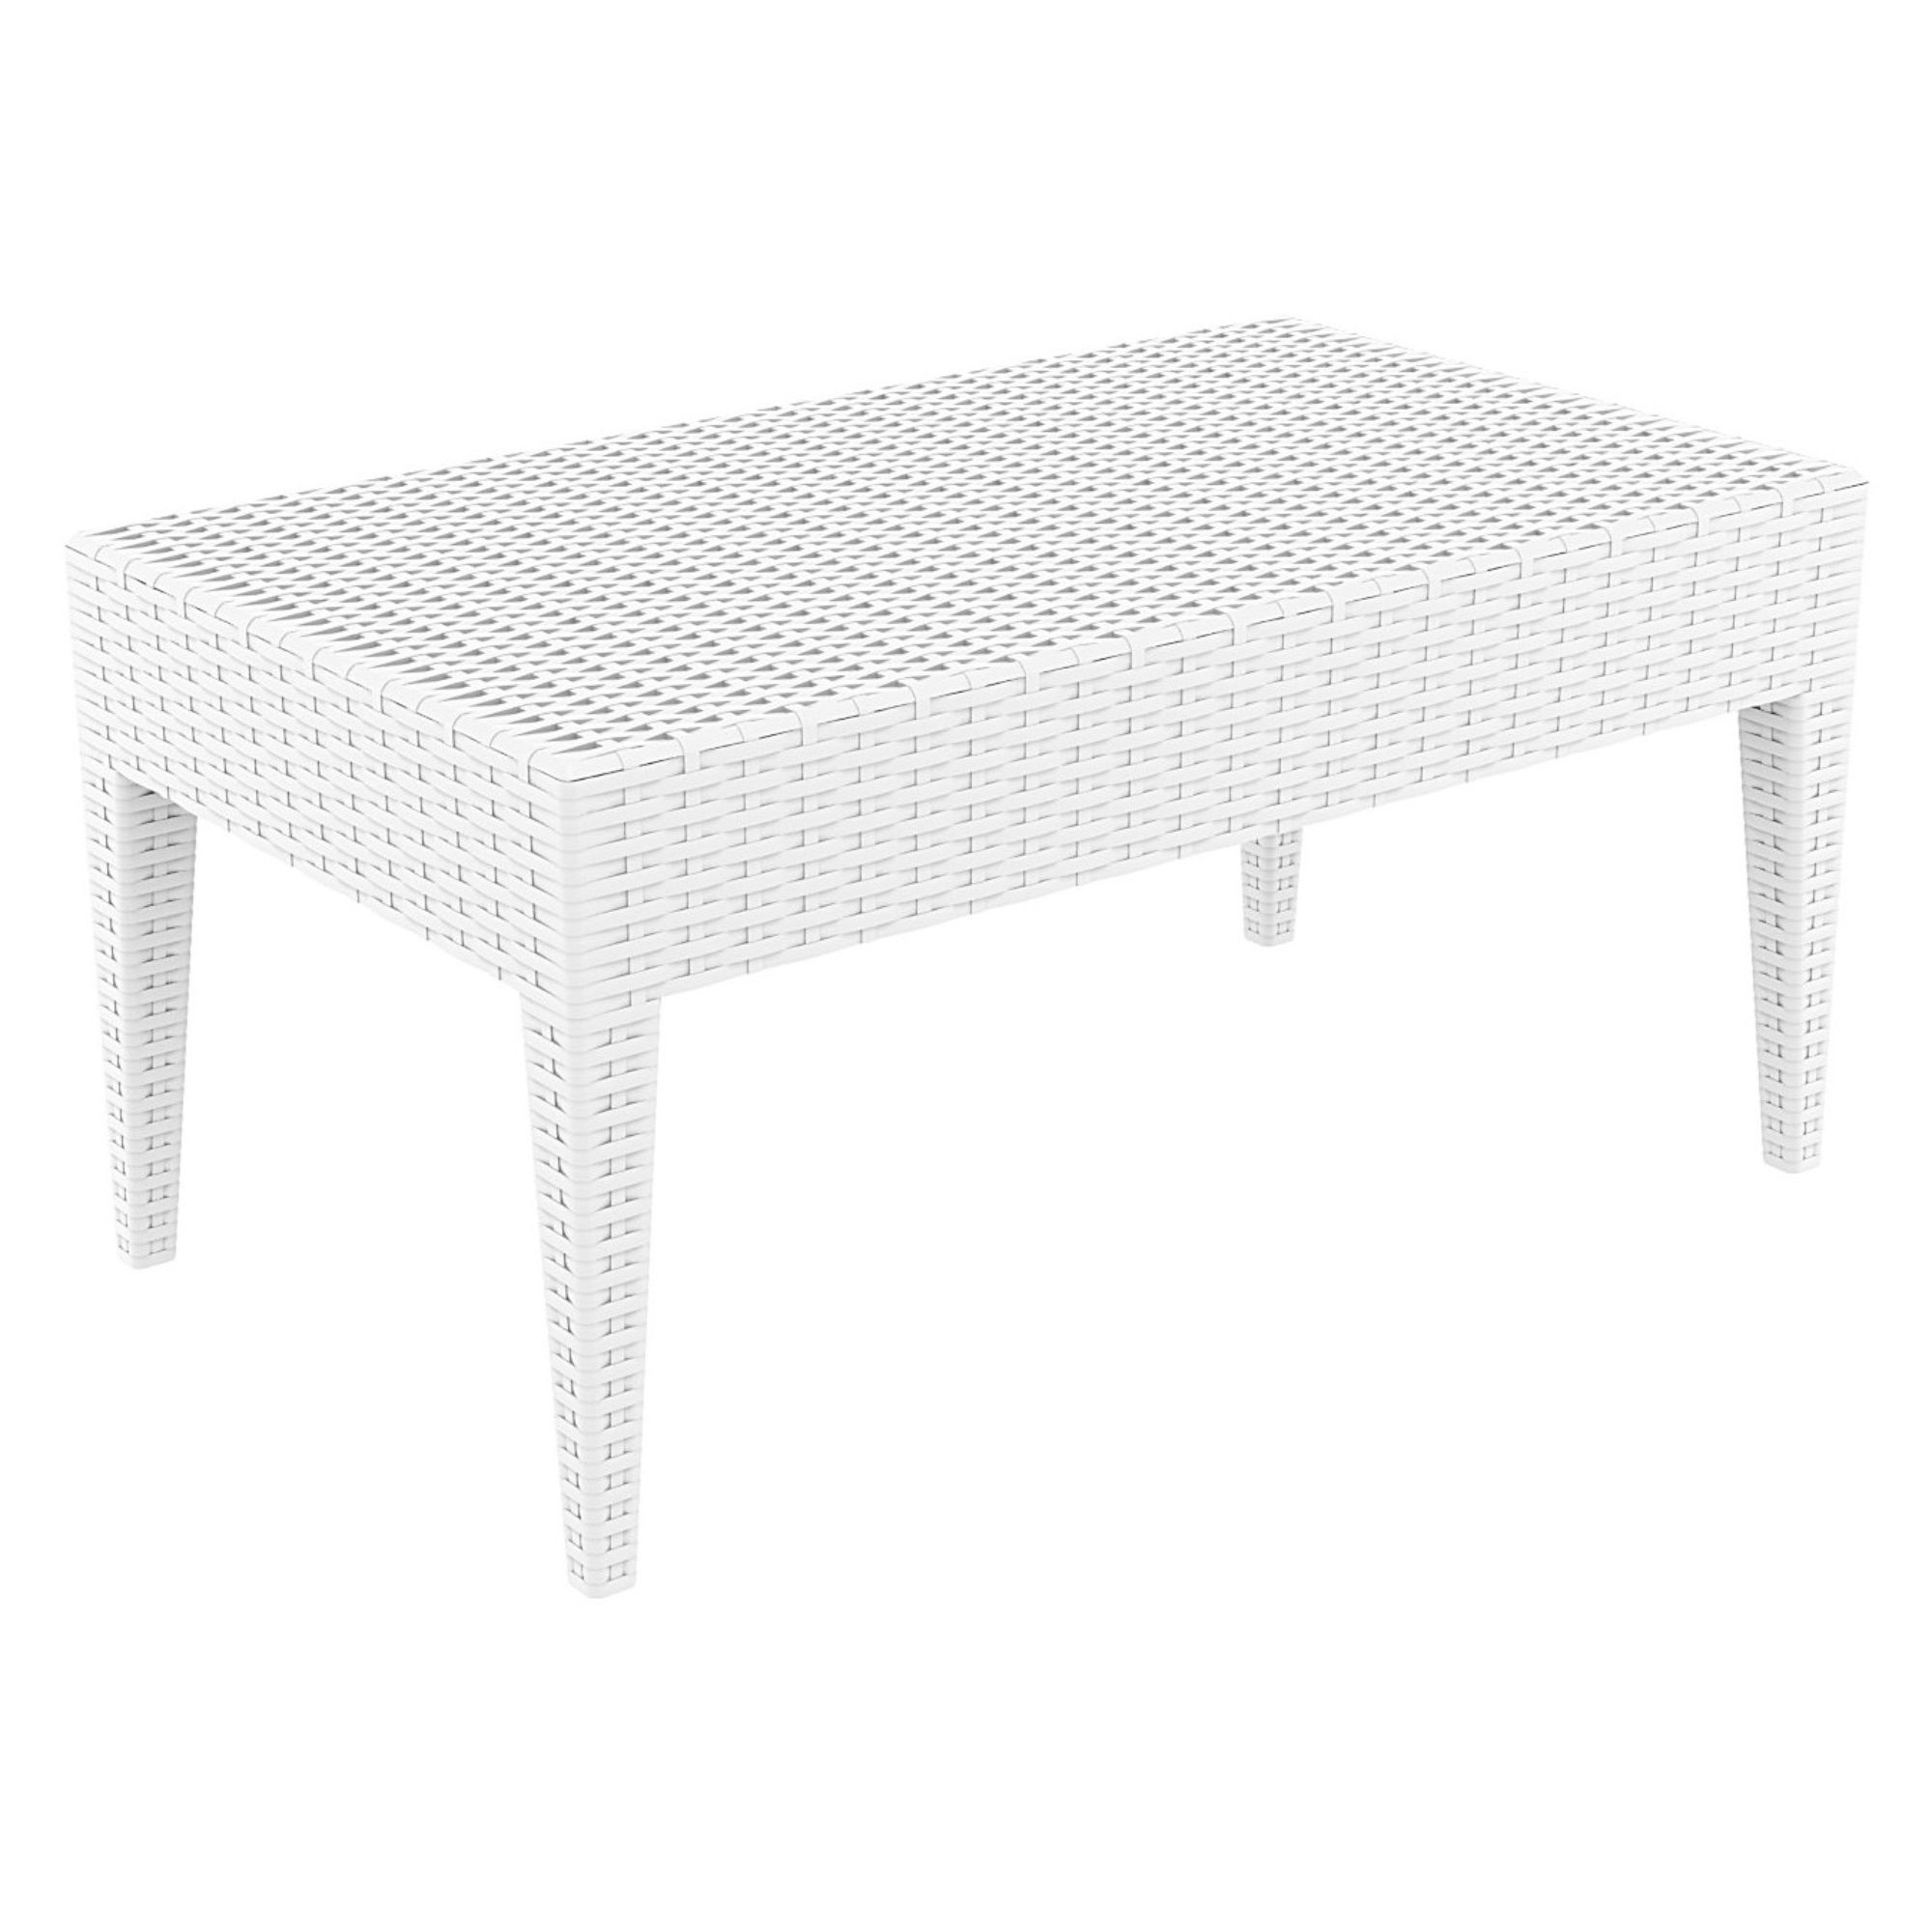 Luxury Commercial Living 36" White Outdoor Patio Wickerlook Rectangular Coffee Table - image 1 of 2